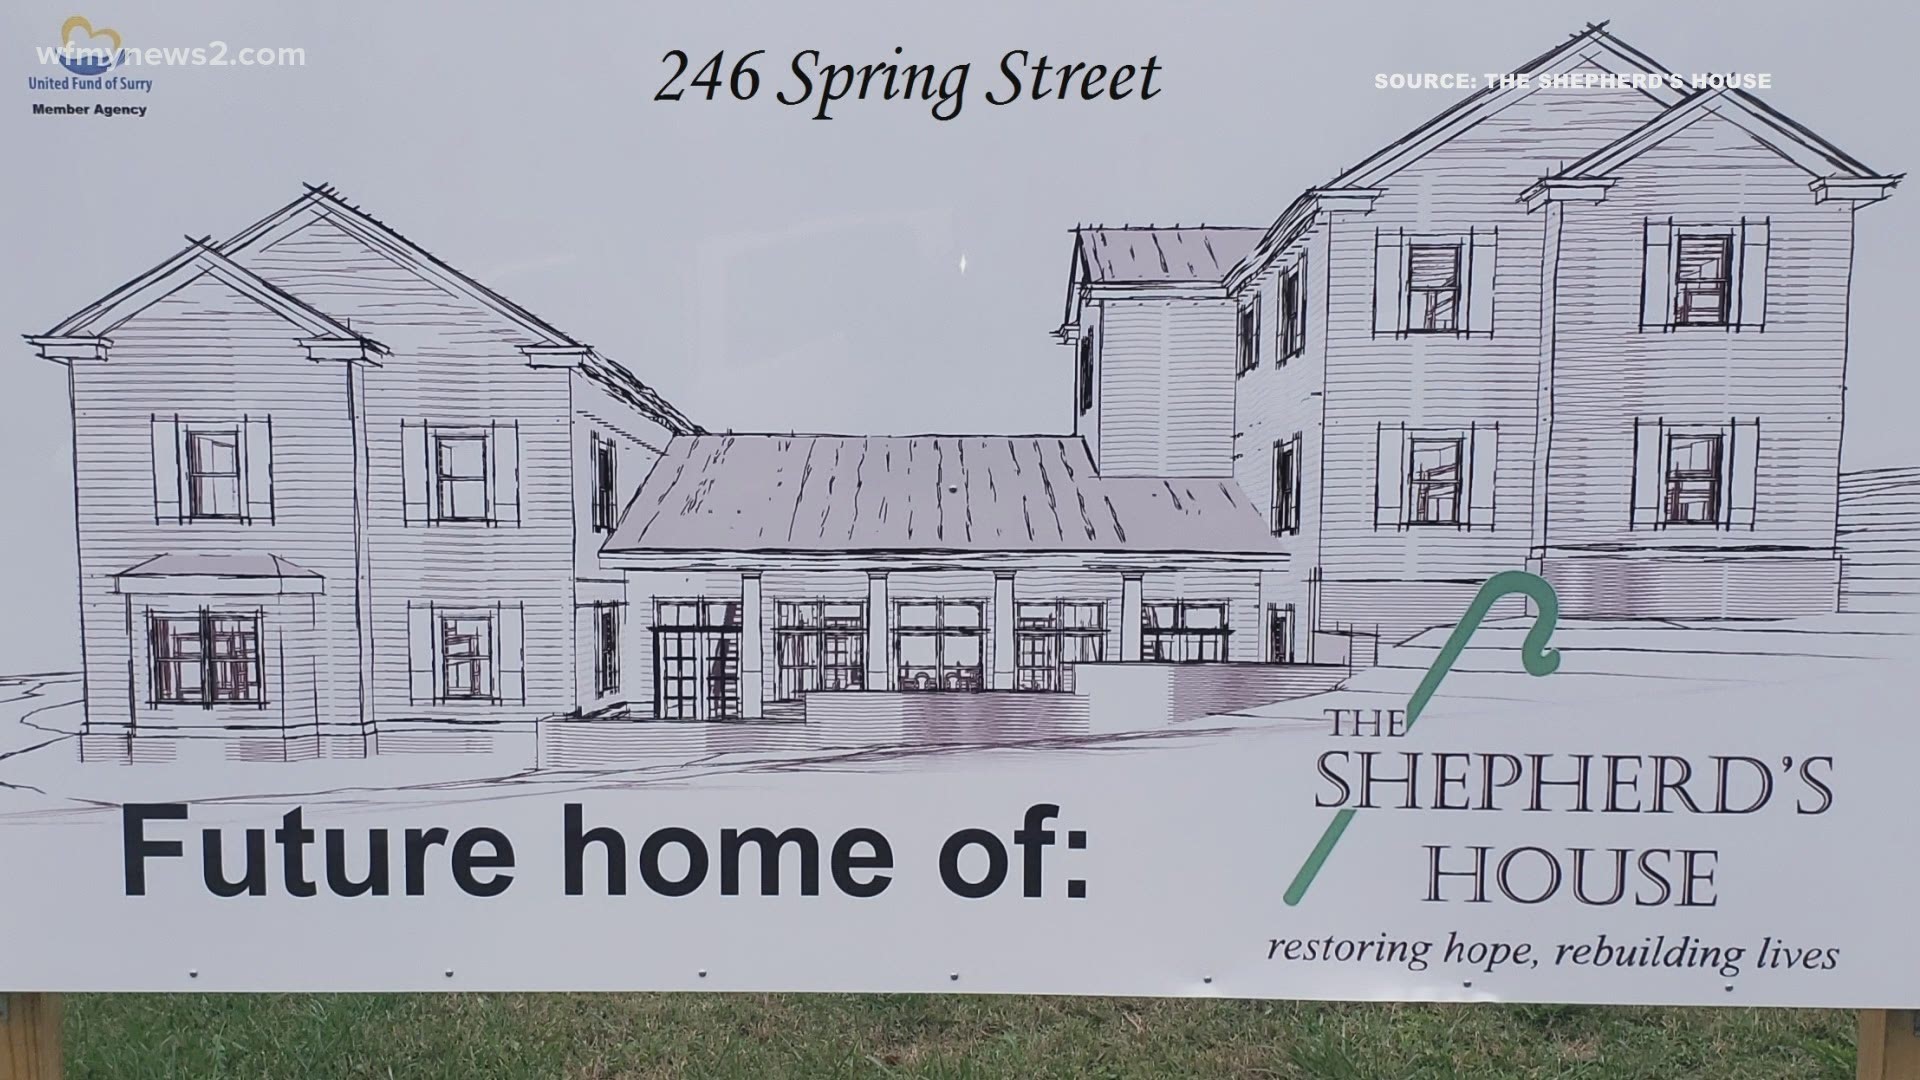 The Shepherd’s House in Mount Airy opened in 2003 for people in crisis. It’s executive director says the organization broke ground on a new building a few weeks ago.